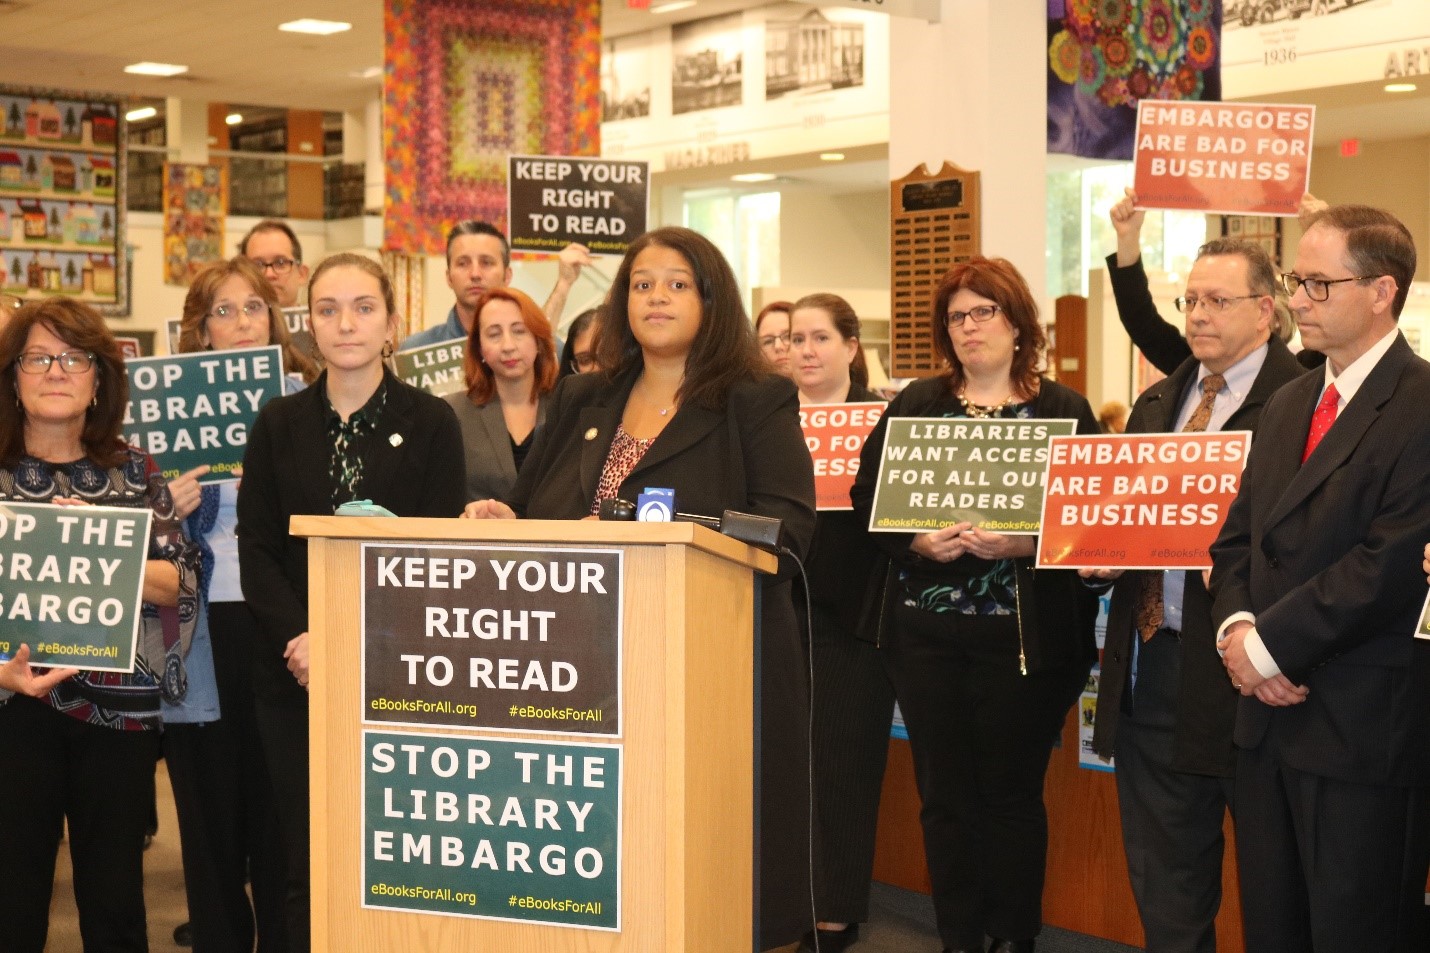 Assemblywoman Solages leads a rally with librarian and advocates to push Macmillan to end their e-book embargo.